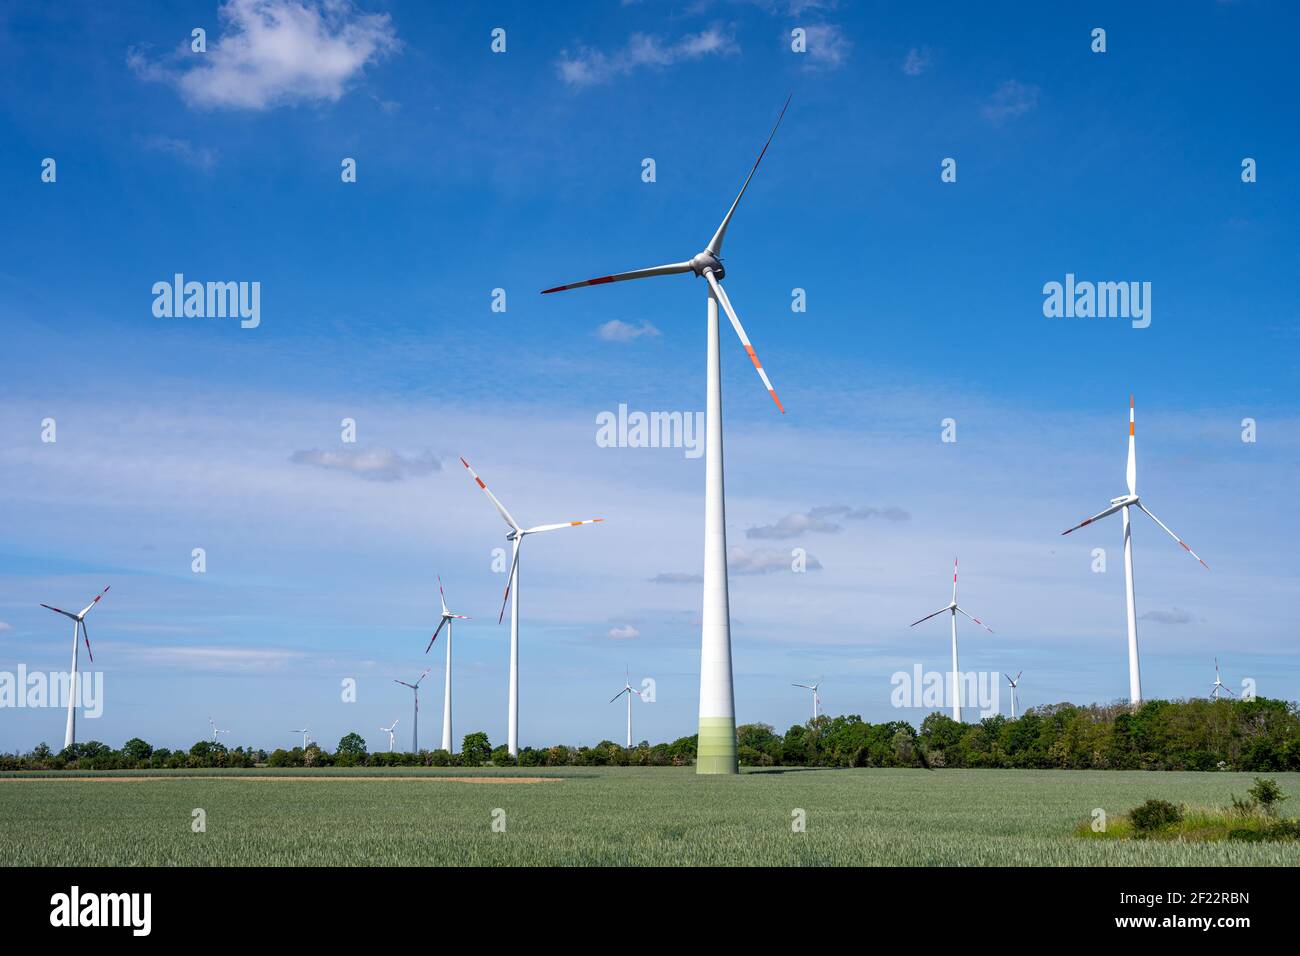 Wind turbines on a sunny day seen in Germany Stock Photo